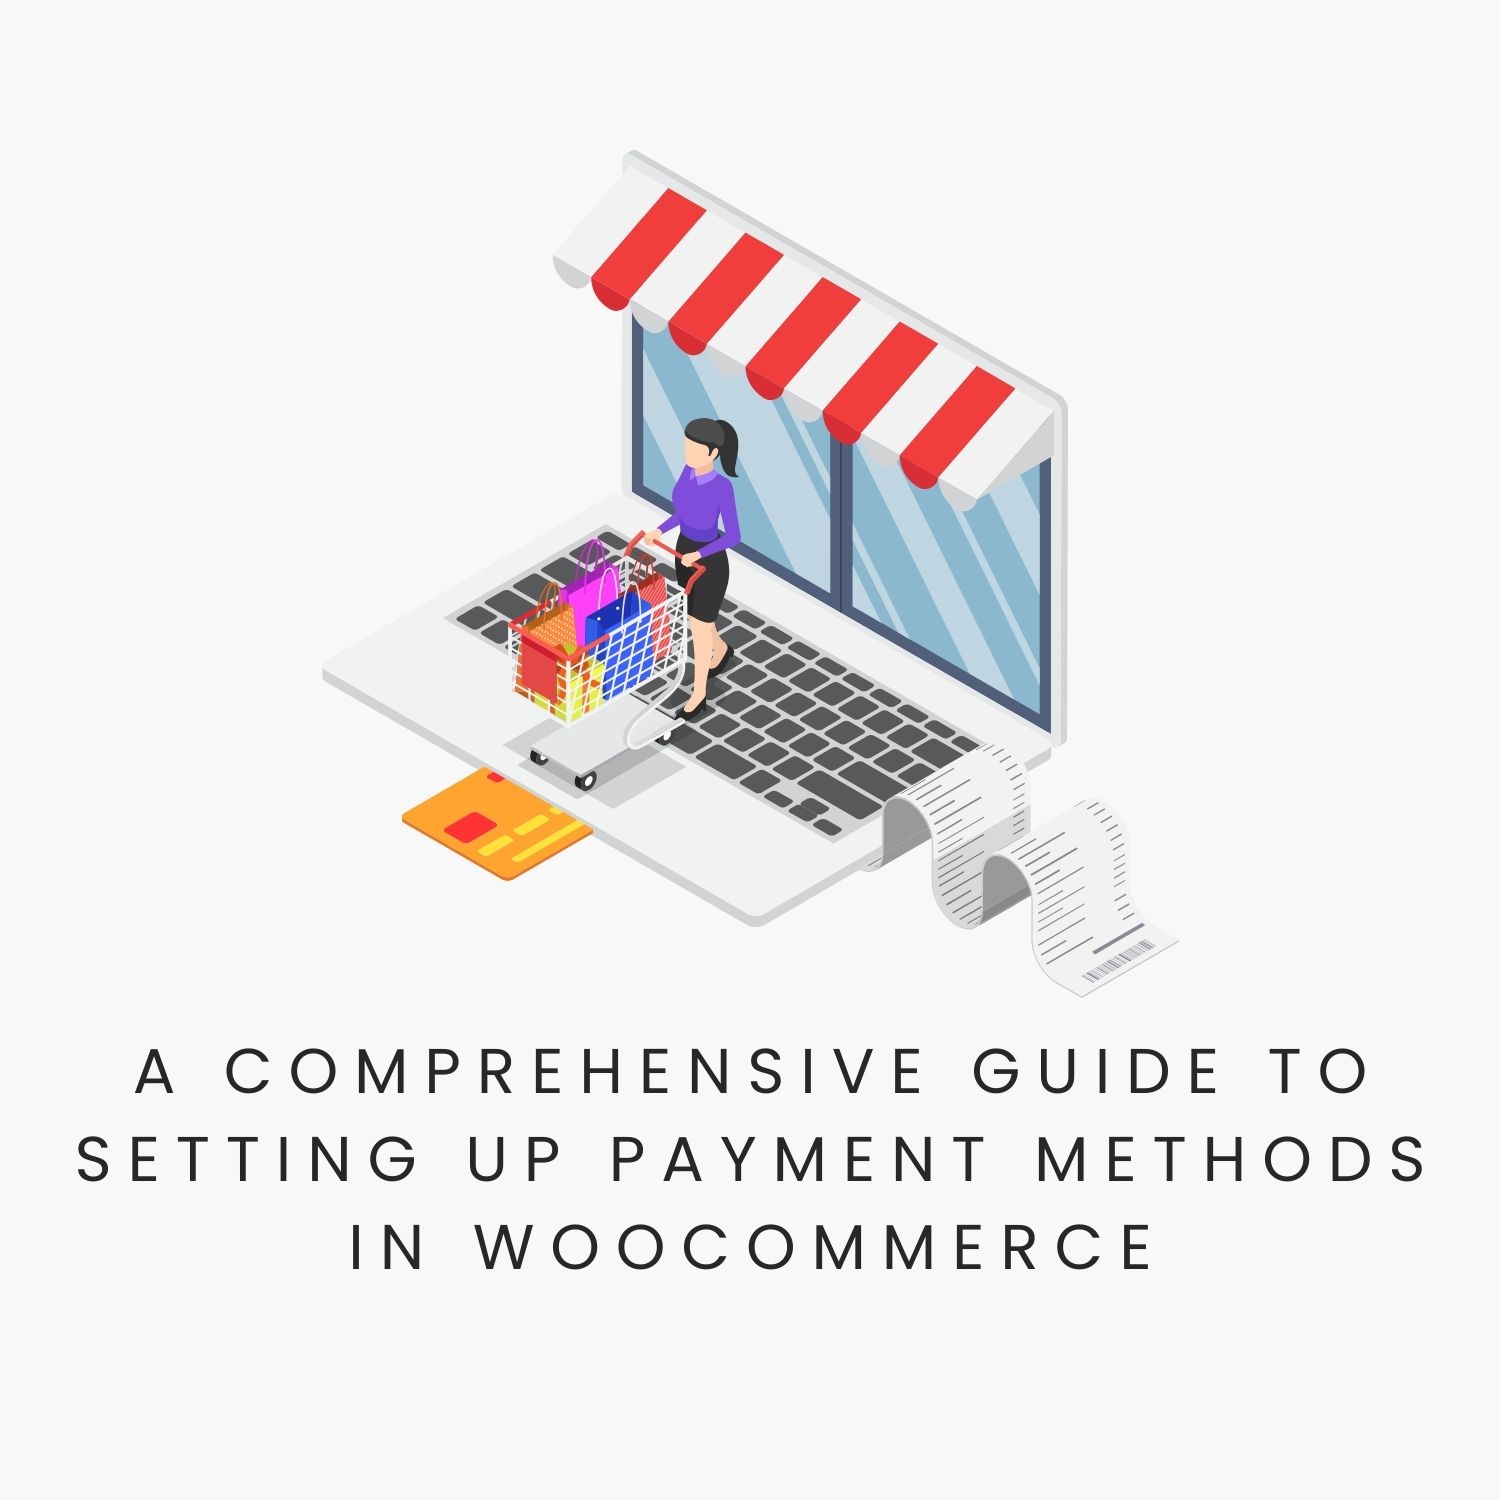 A comprehensive guide to setting up payment methods in WooCommerce